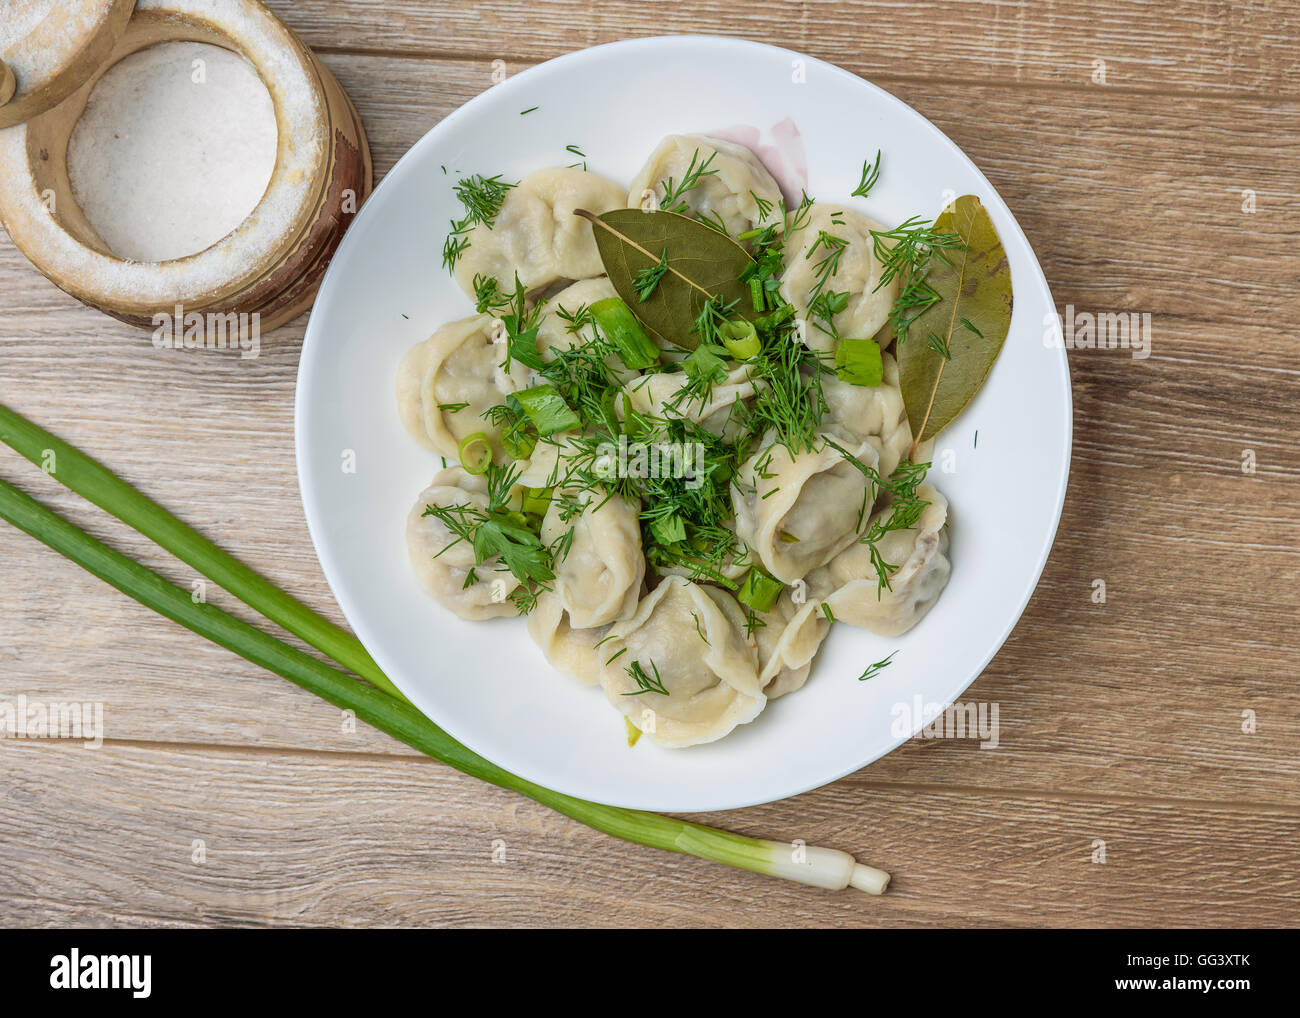 plate of traditional Russian dumplings sprinkled with herbs on a wooden table Stock Photo